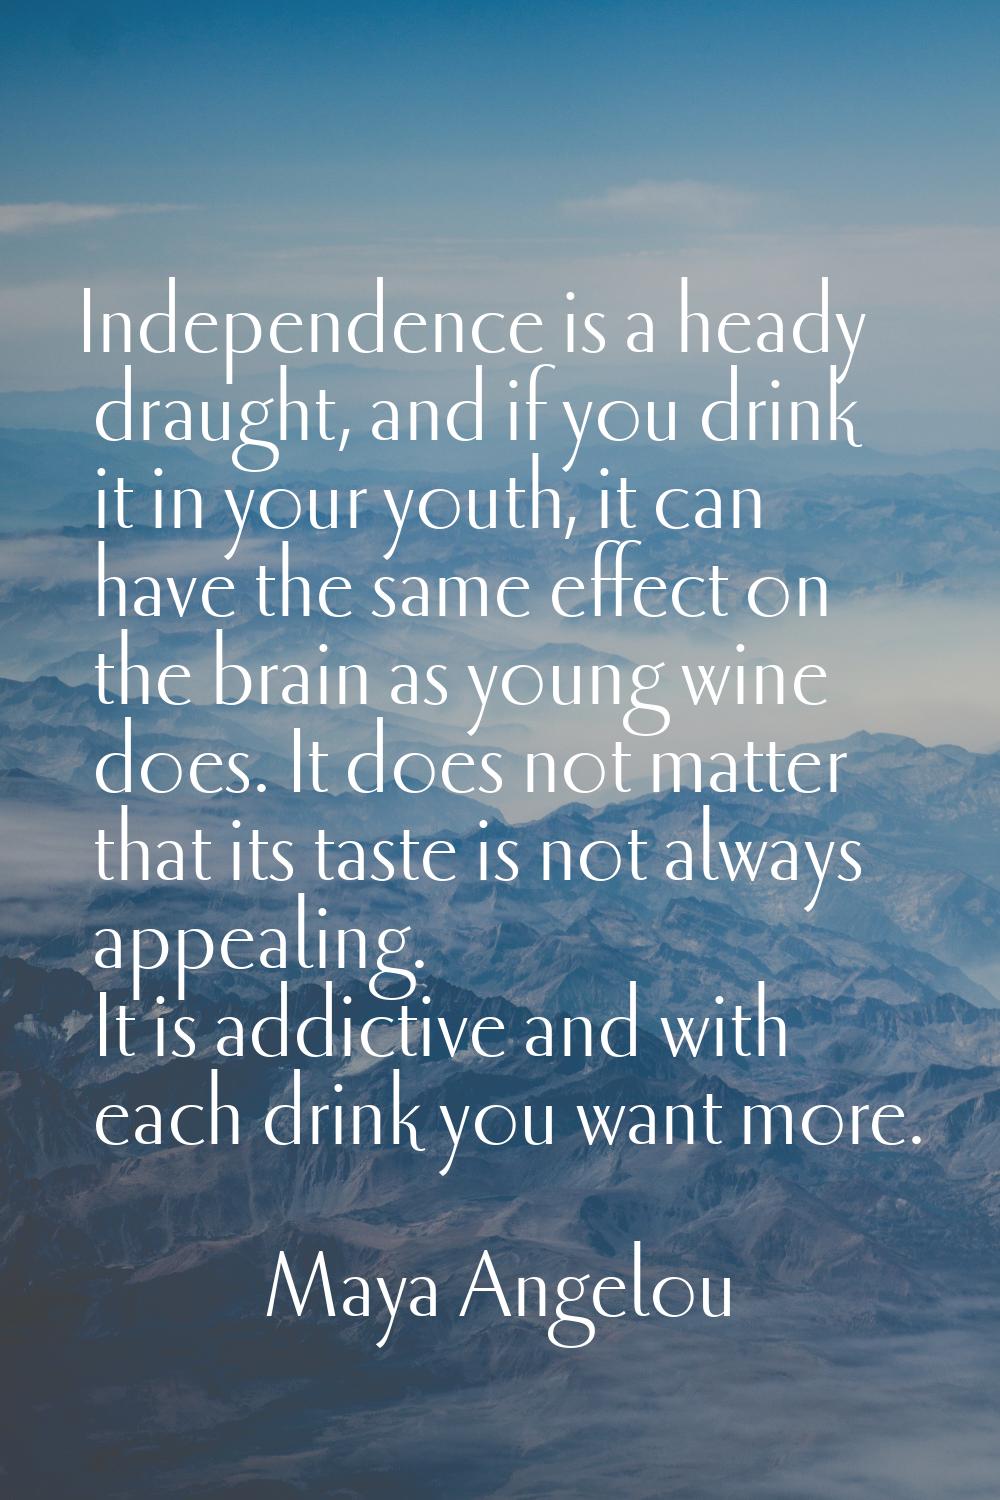 Independence is a heady draught, and if you drink it in your youth, it can have the same effect on 